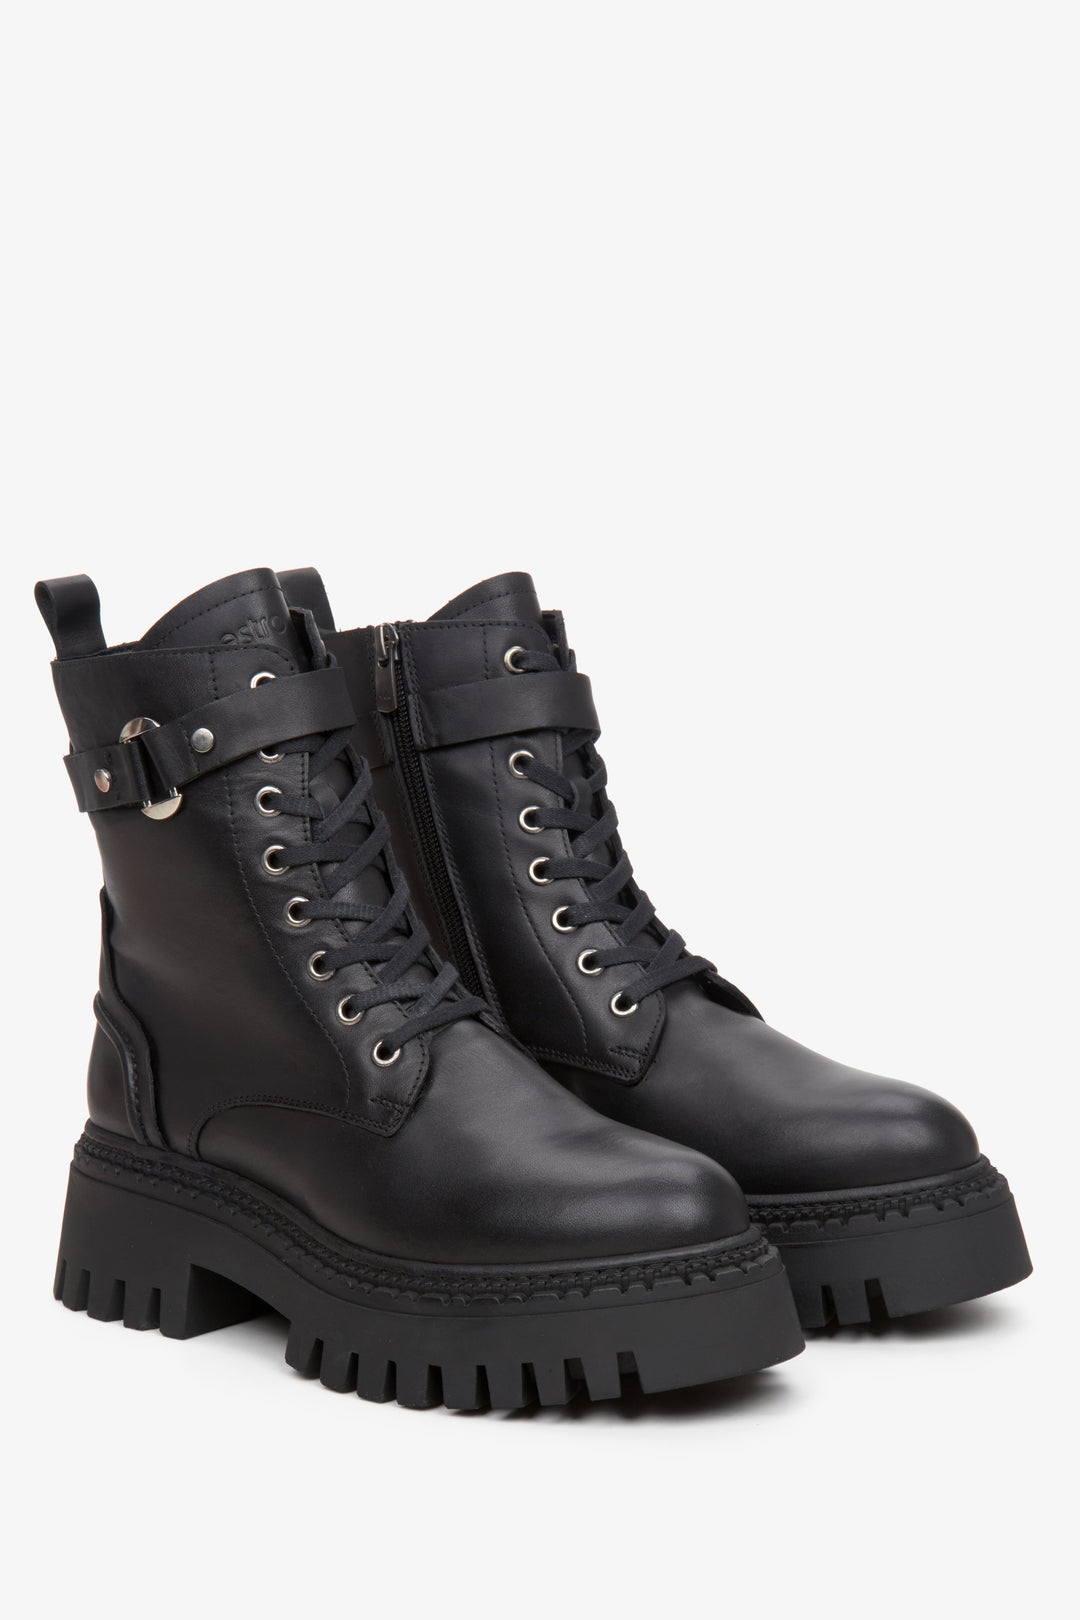 Women's black ankle boots made of genuine leather by Estro.